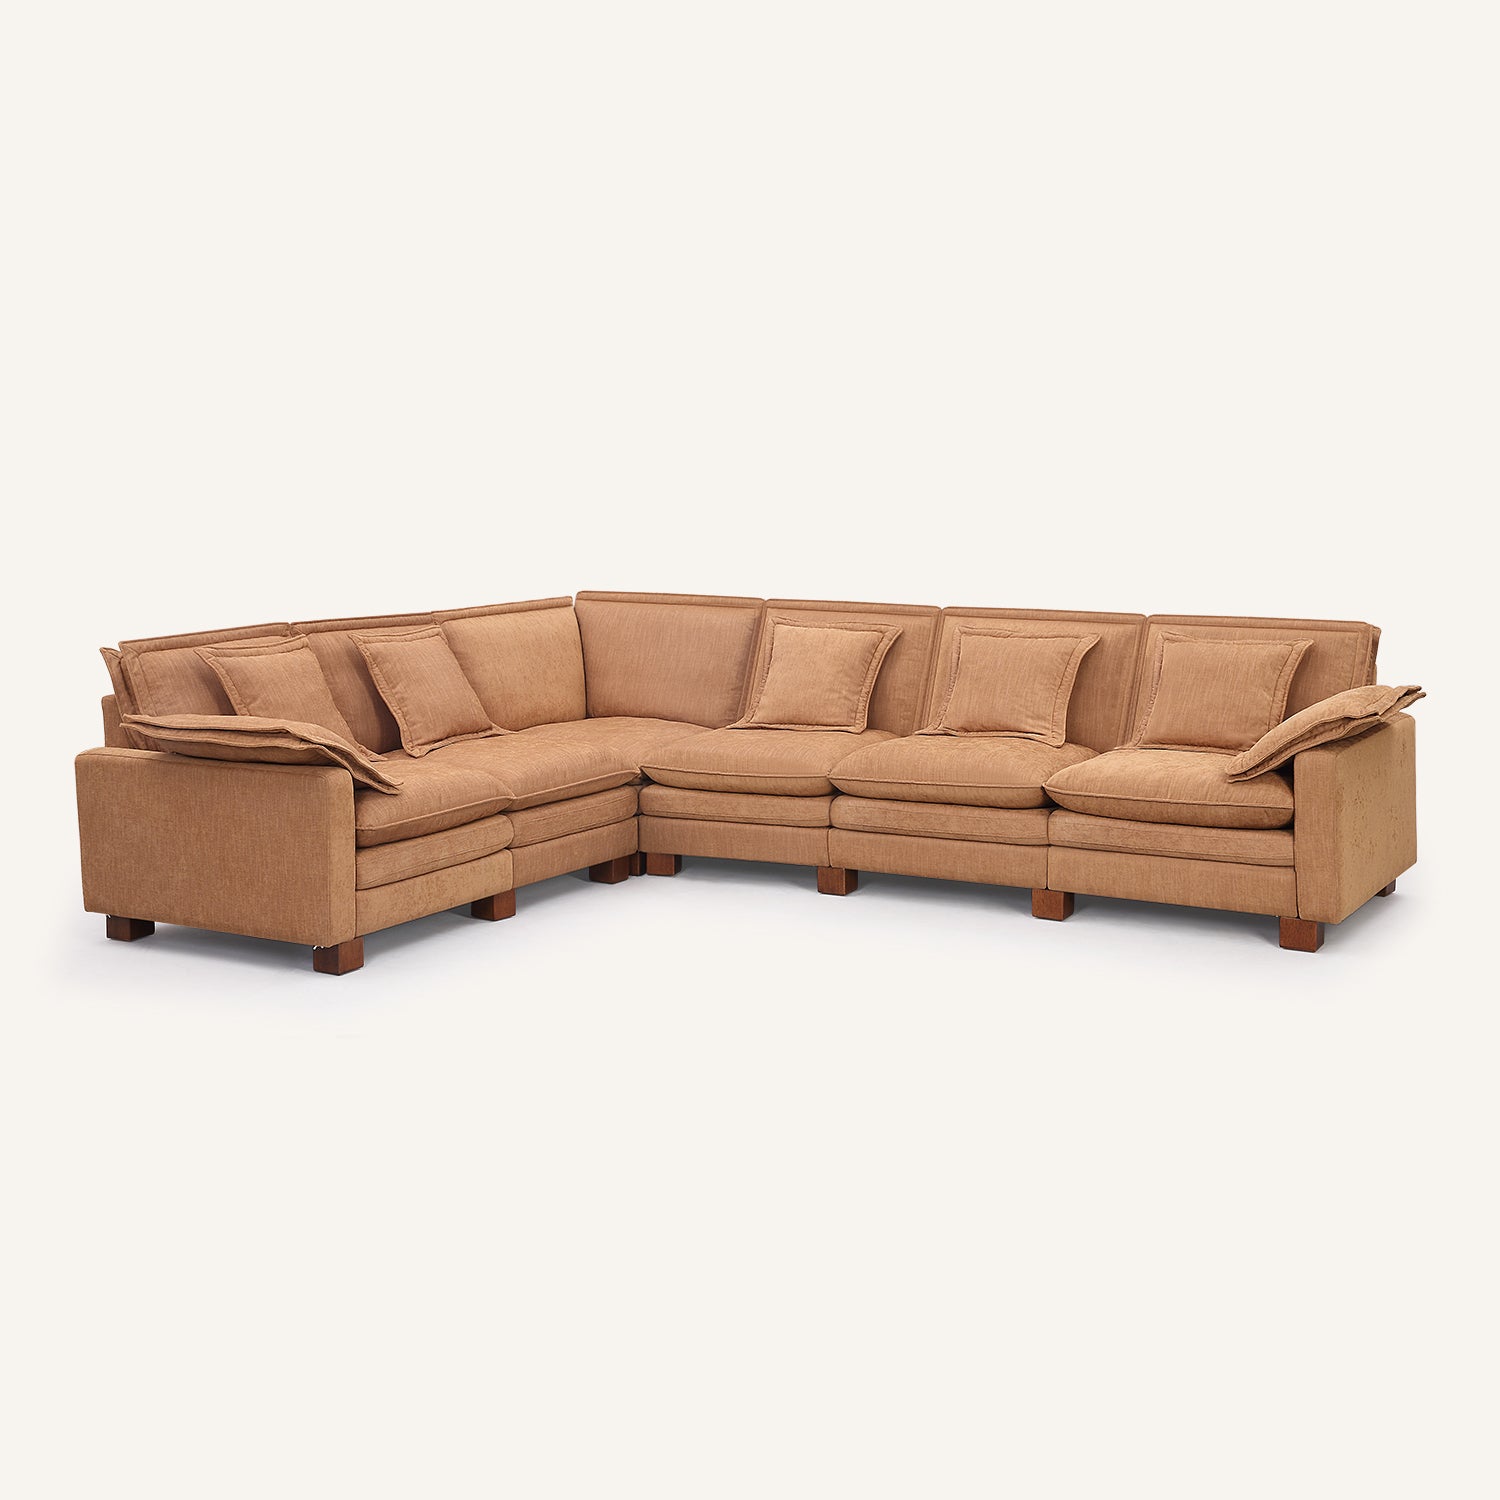 Stacked Tan Linen 6-Seat Corner Sectional